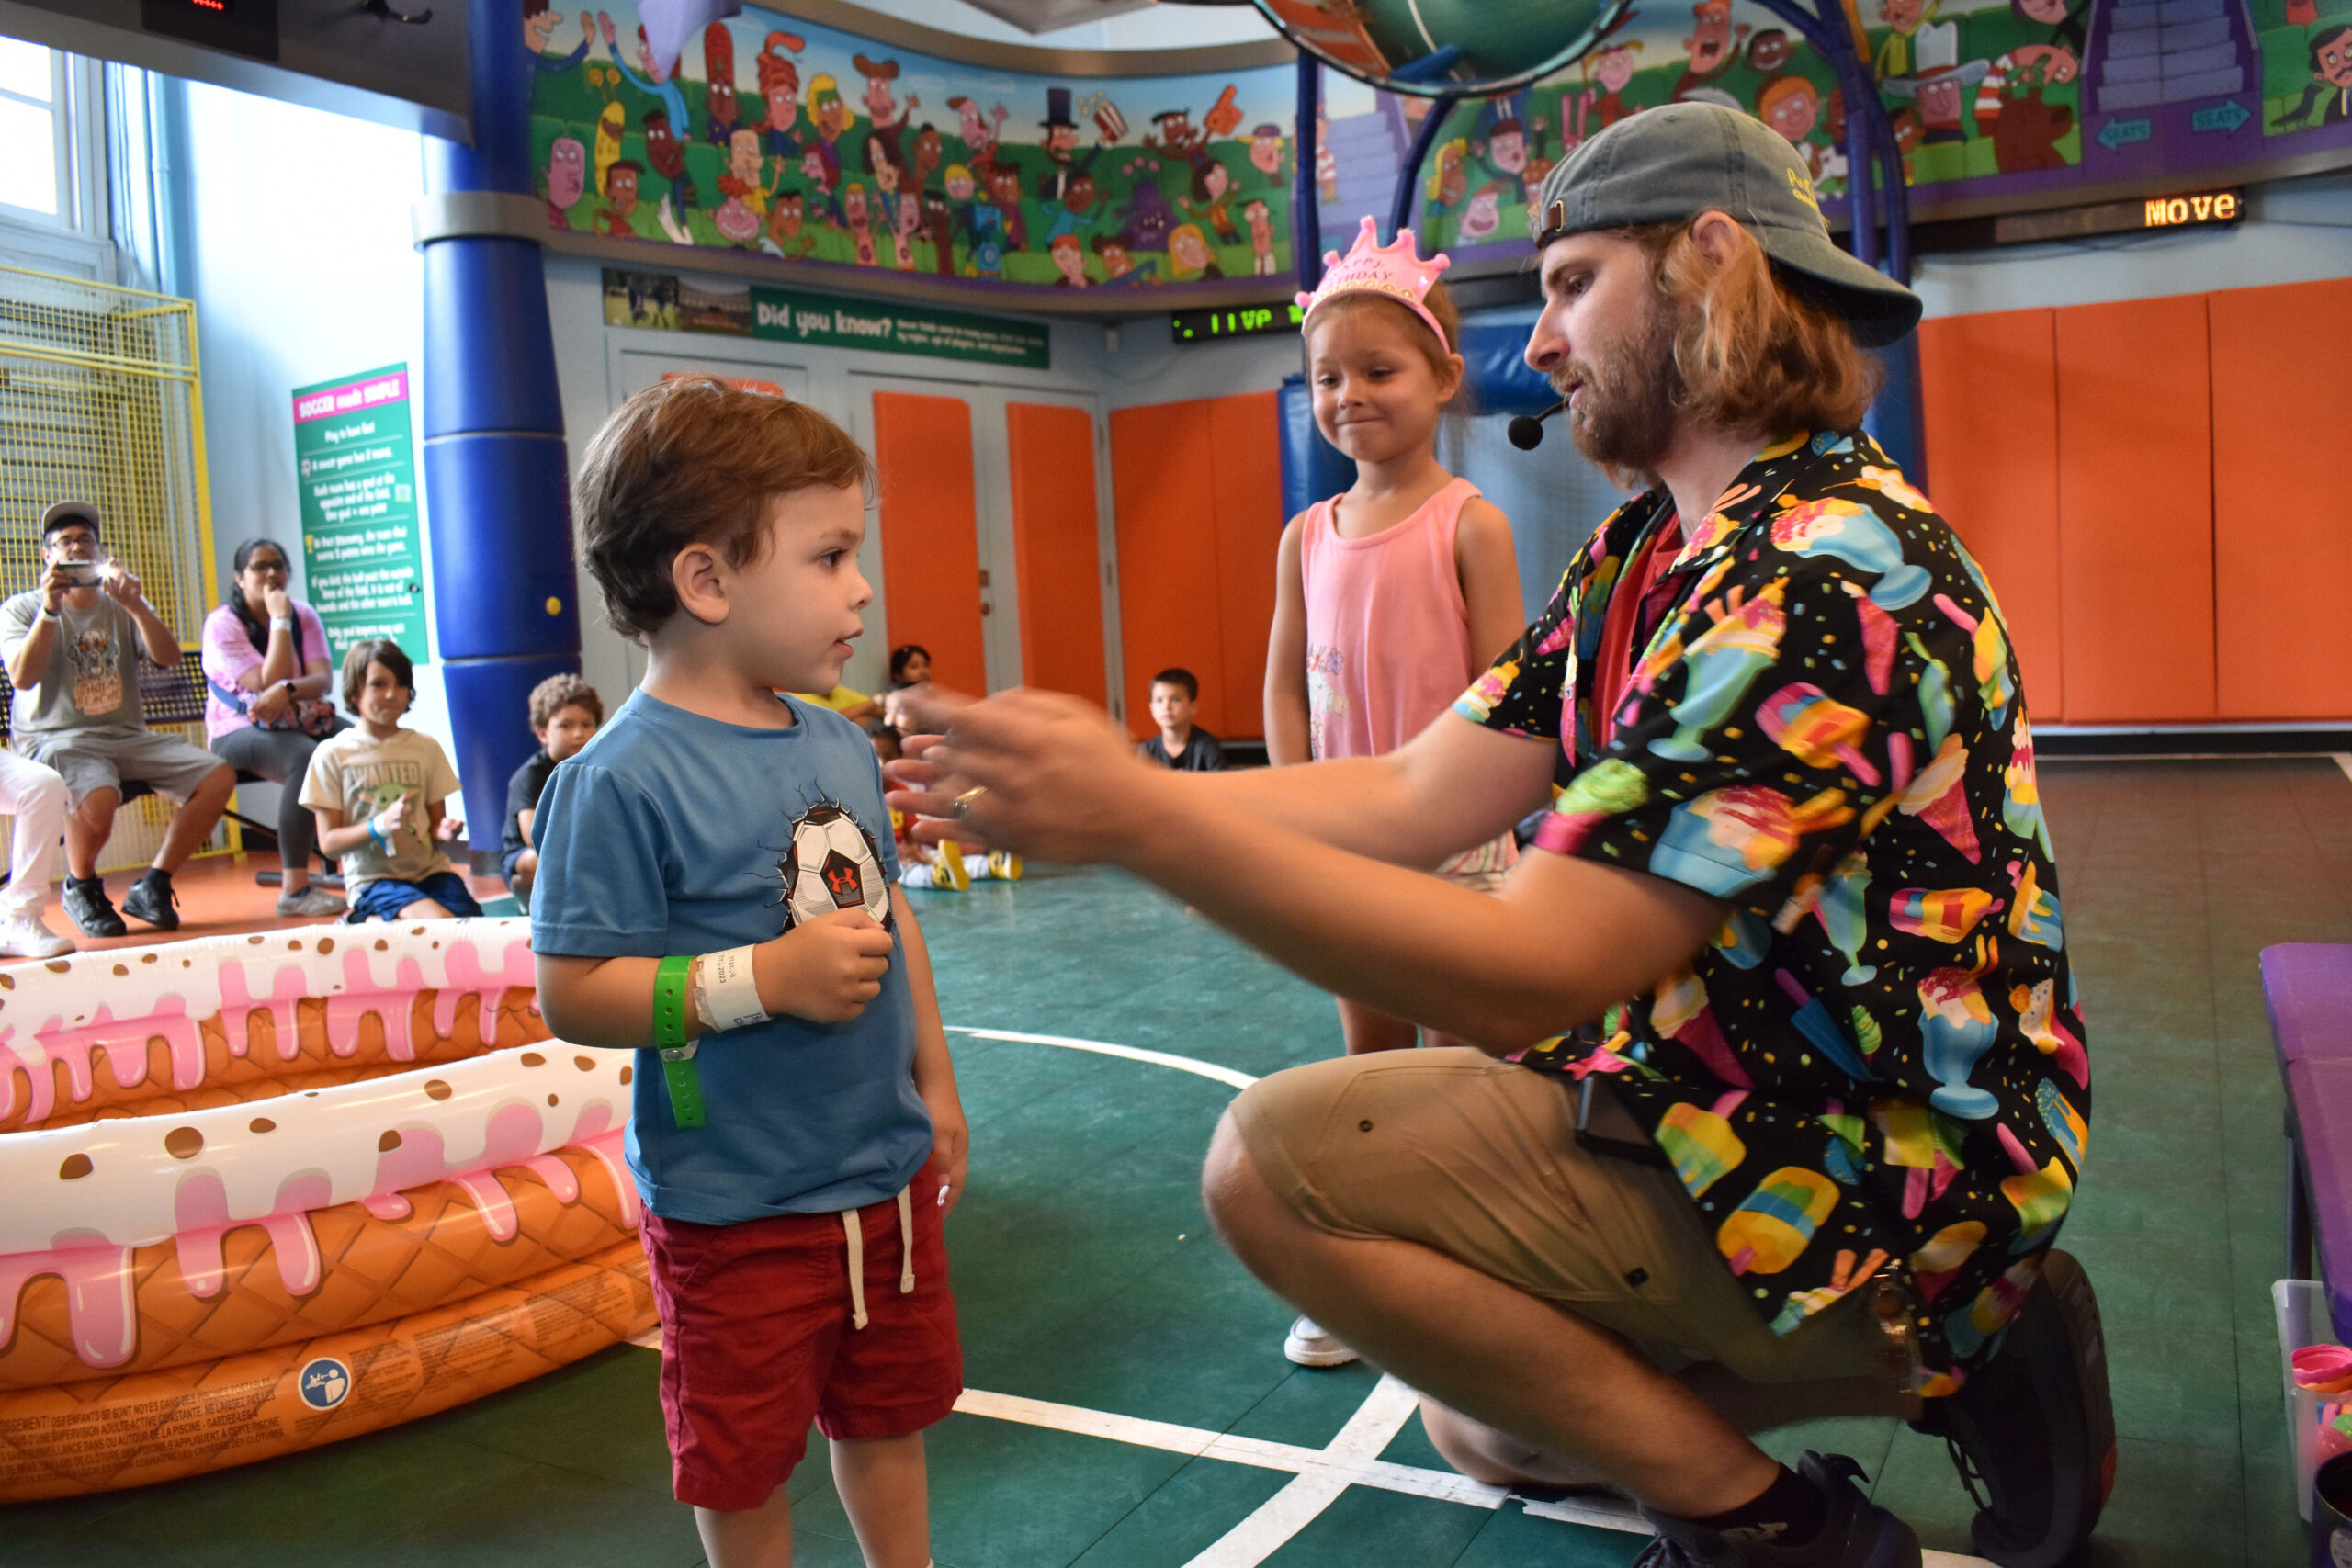 a staff member explaining a game to two children